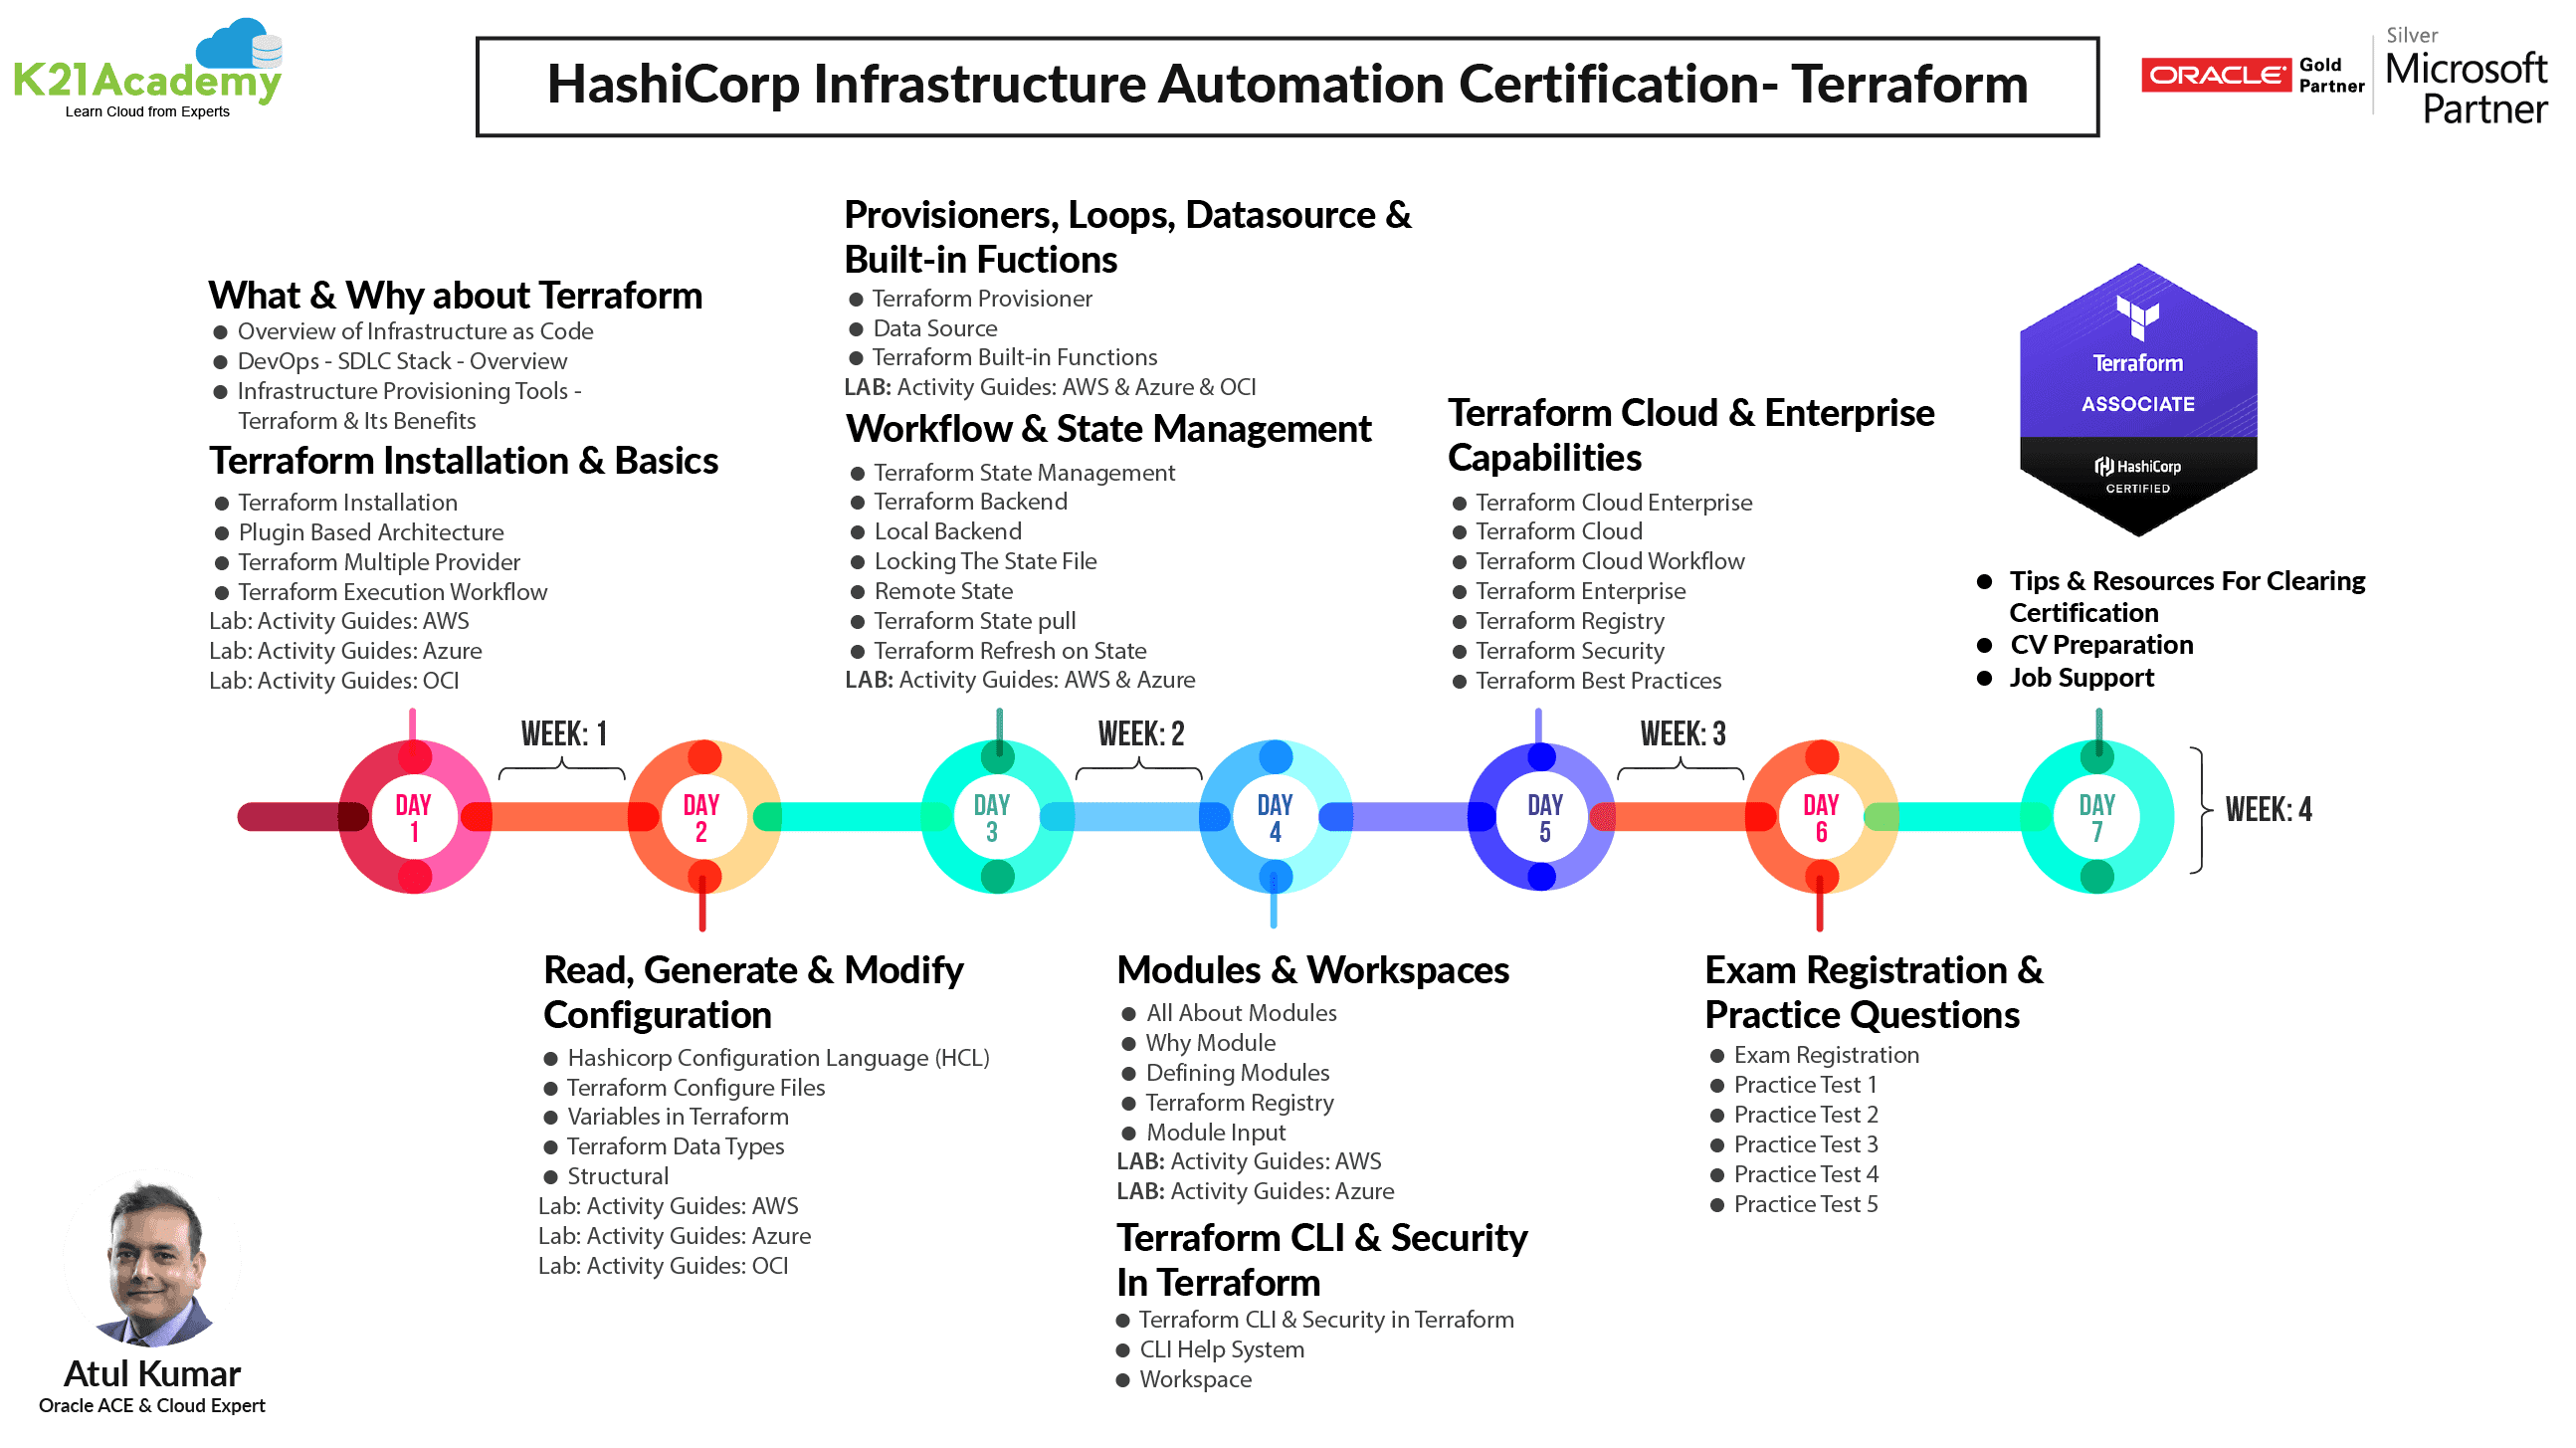 HashiCorp Infrastructure Automation Certification Roadmap